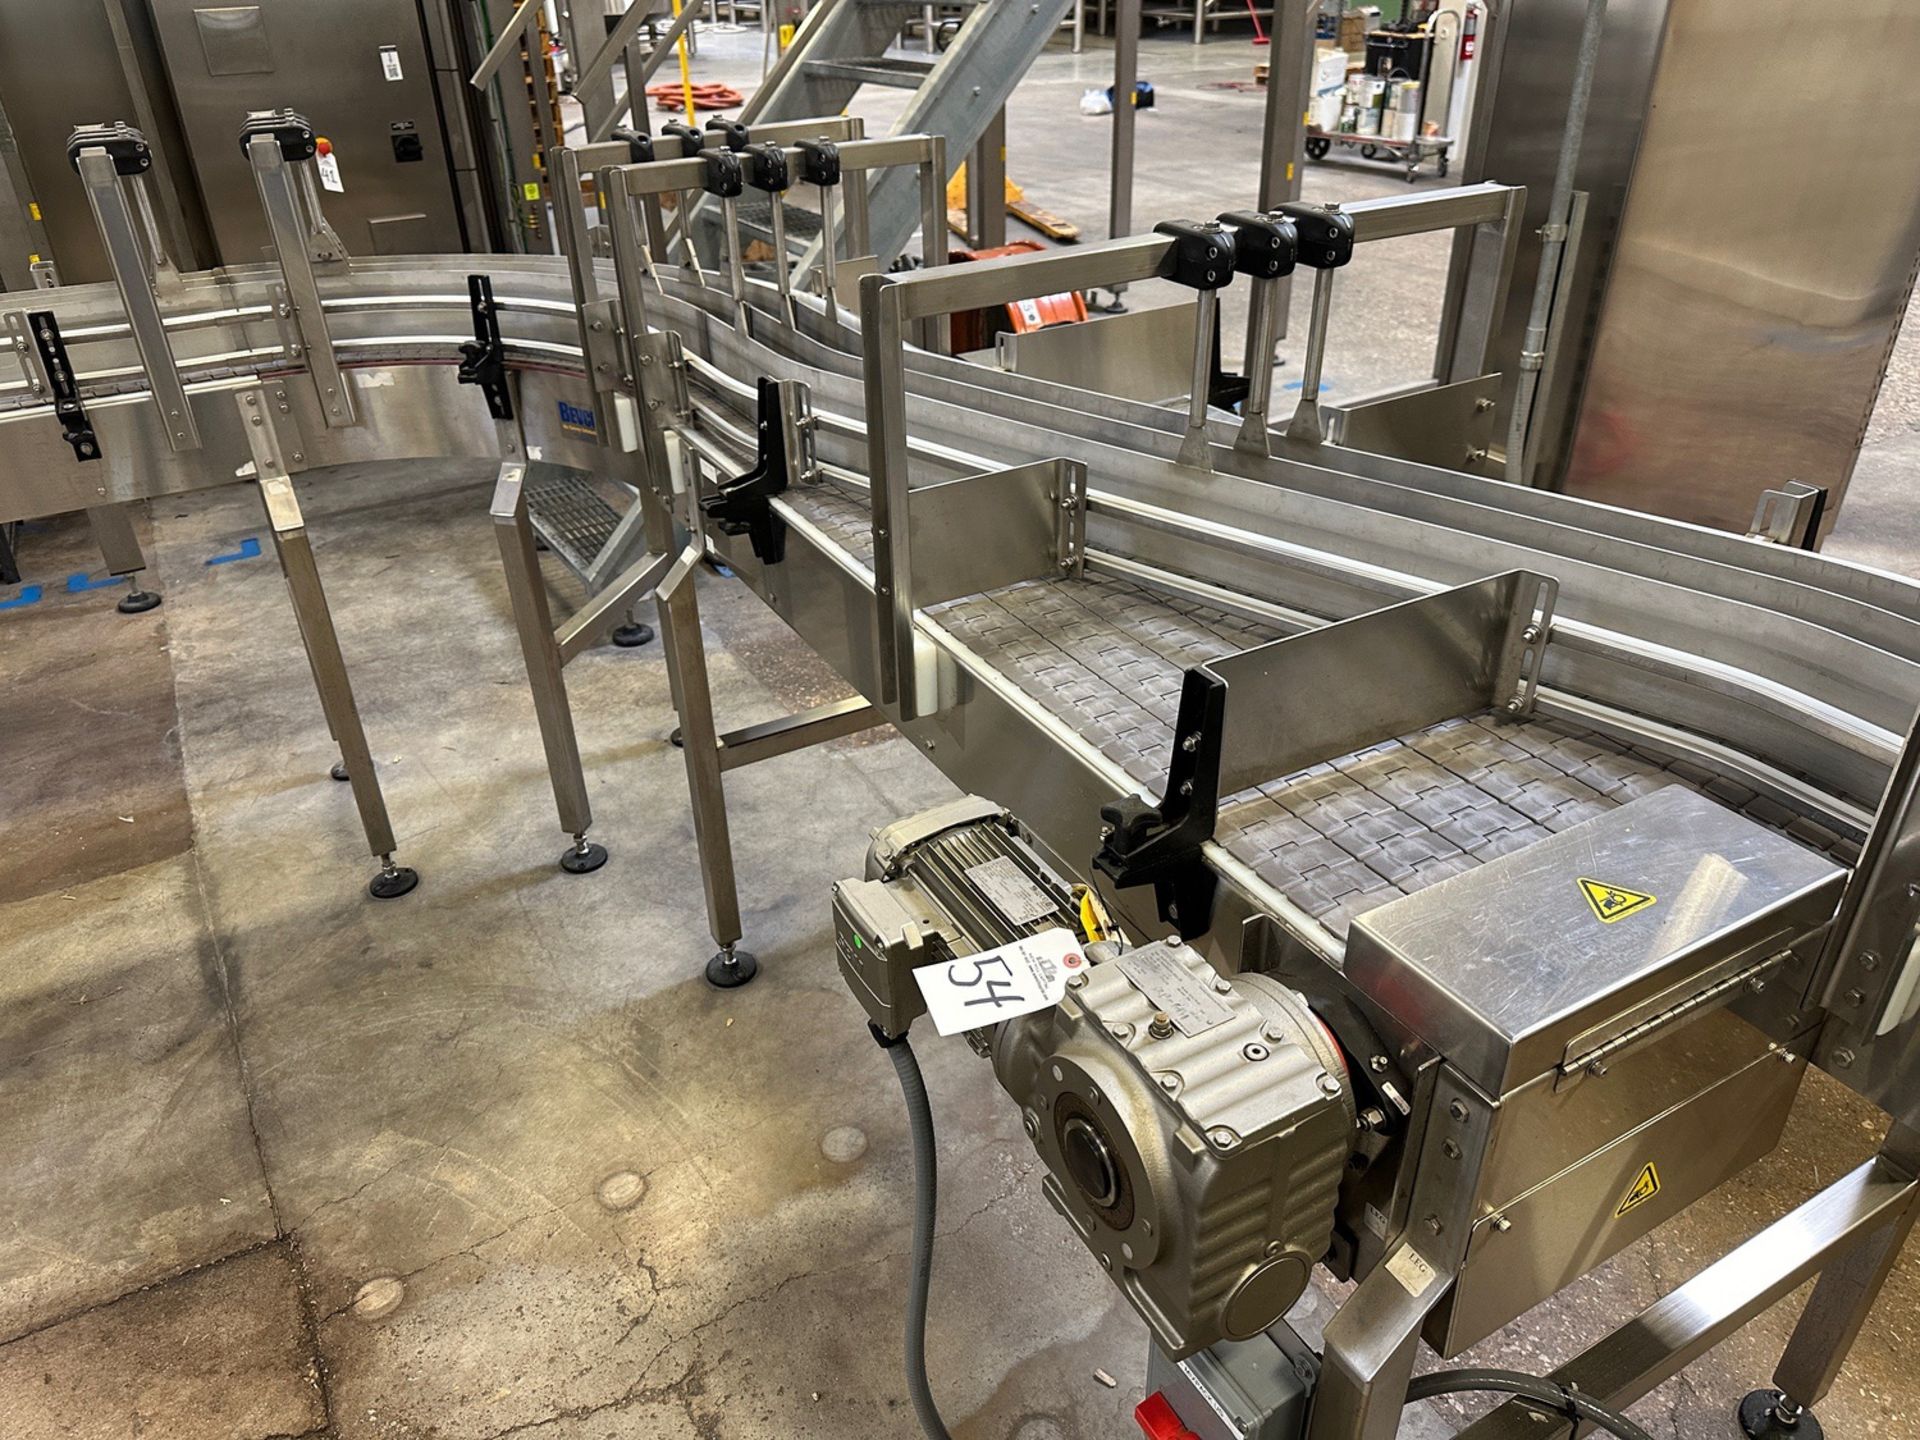 Bevco Conveyor over Stainless Steel Frame (Approx. (5) 3.25" Belts x 25' to Laning and Packoff Conve